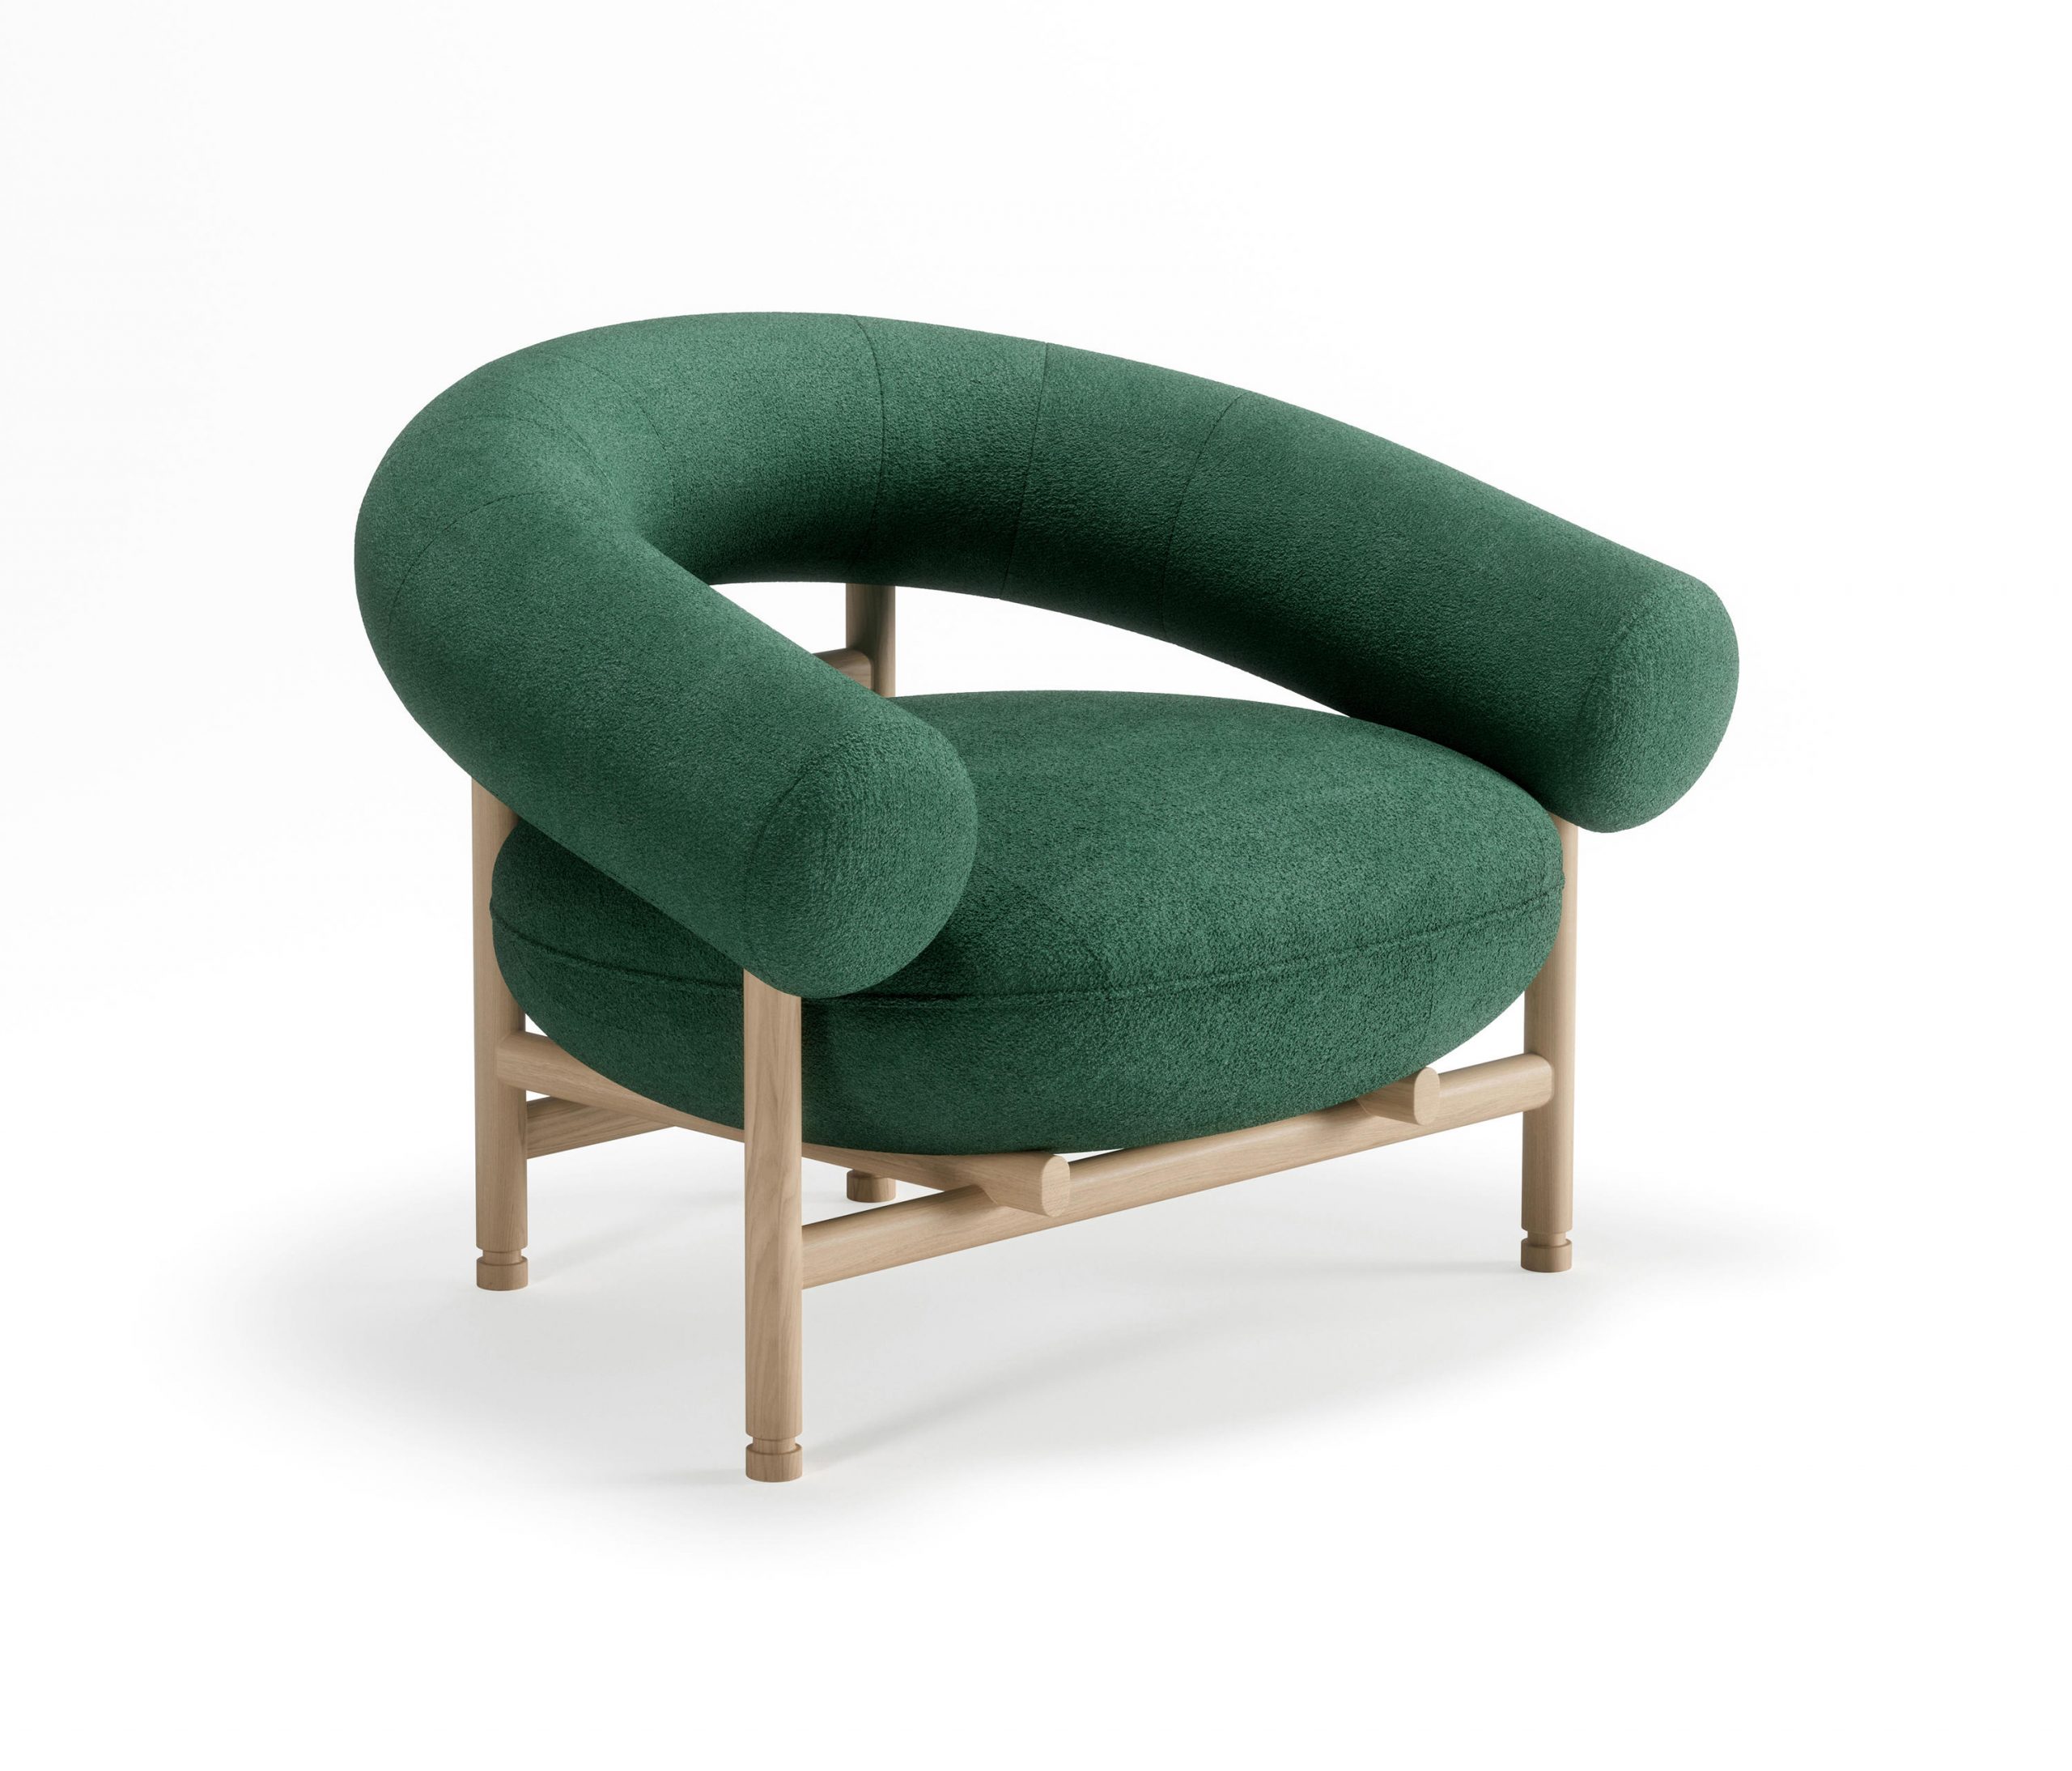 Loop Lounge Chair by David Girelli for Wewood